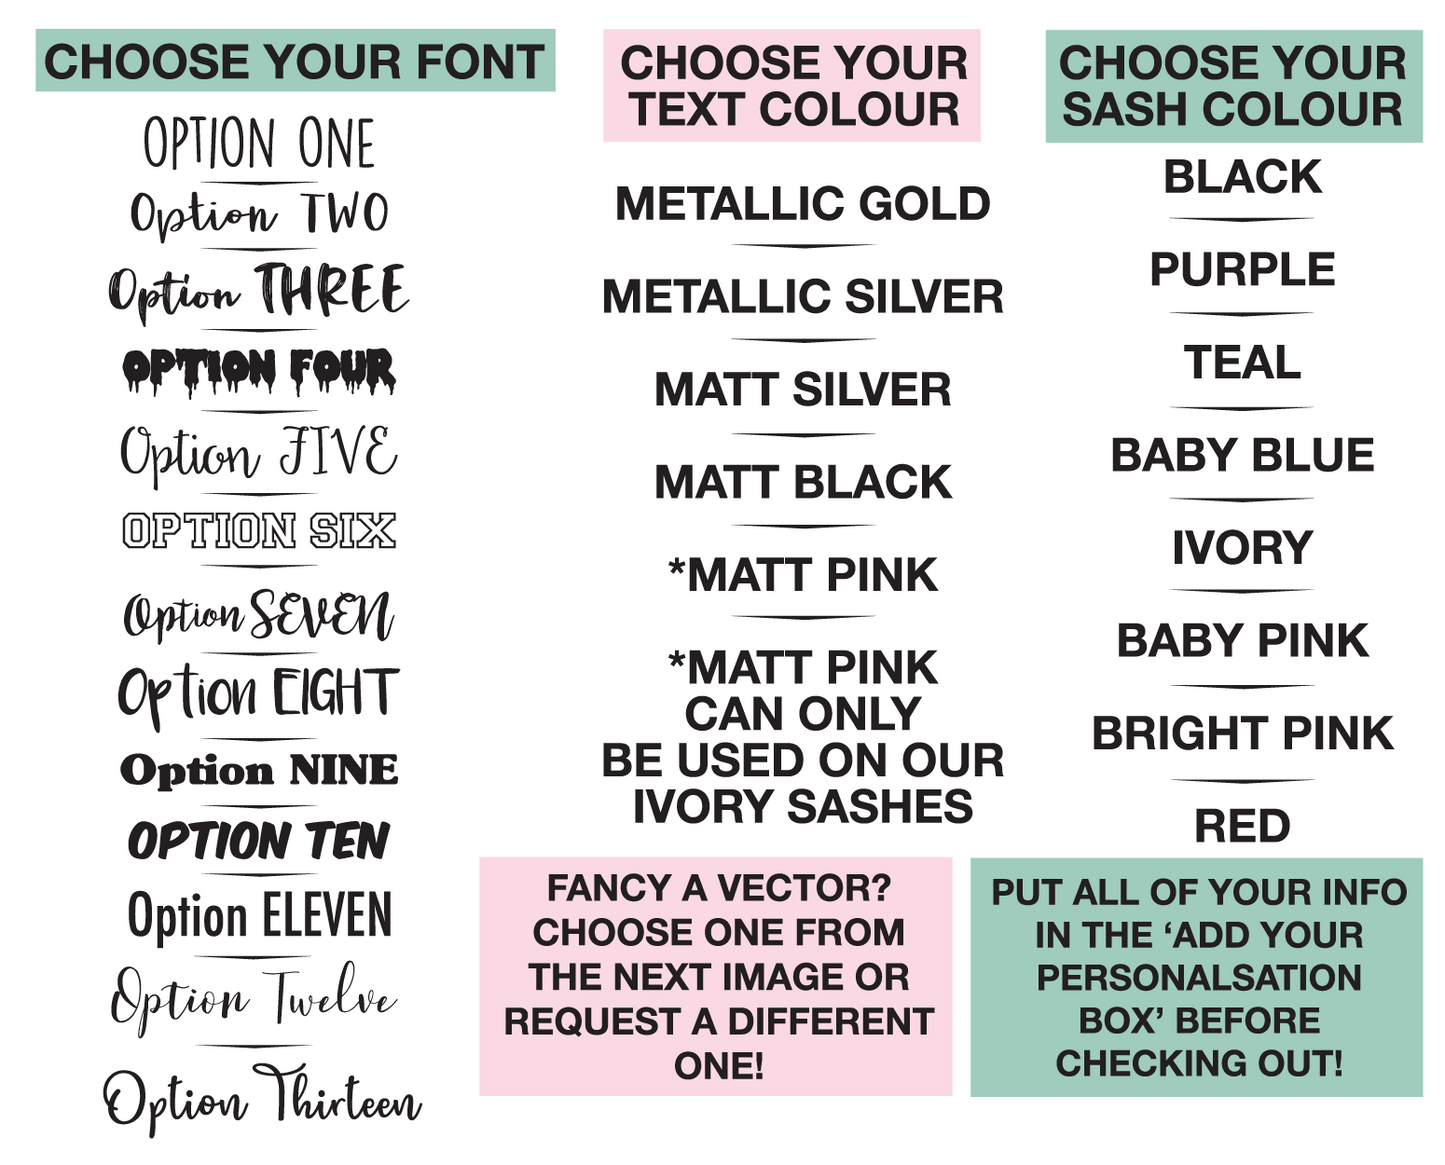 choose your own font, text colour and sash colour to personalise your own sash or banner